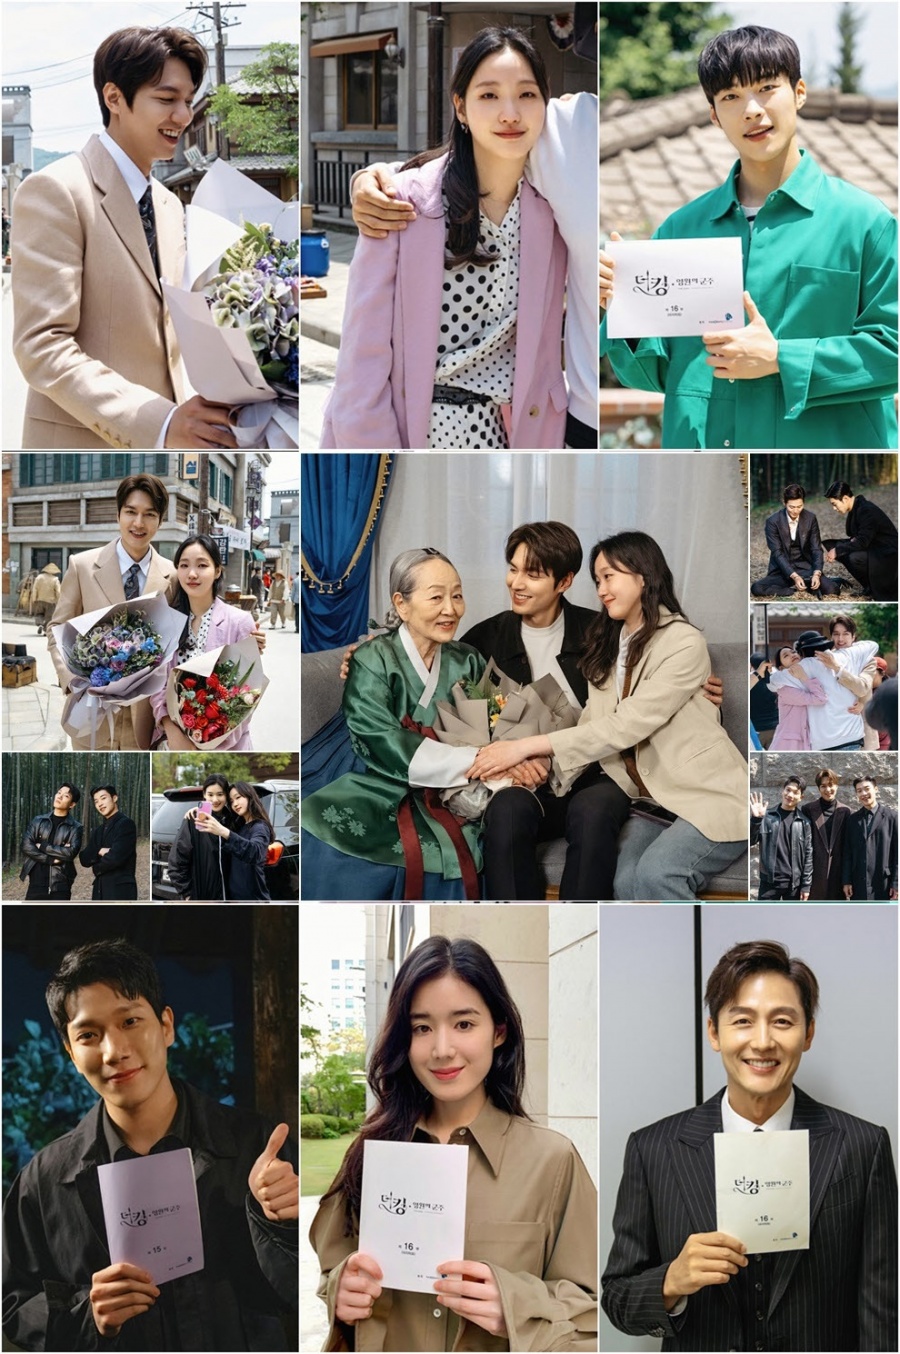 The actors of The King - Eternal Monarch gave Ends impression.The actors of SBS gilt drama The King - The Lord of Eternity (playplayed by Kim Eun-sook, directed by Baek Sang-hoon, Jung Ji-hyun) expressed their feelings of sadness ahead of the last broadcast.In addition, he revealed the best scenes he picked up and gave a sad meeting to finish his work.Lee Min-ho, who played the role of Korean Empire Emperor Lee Gon, said, This work is a work that started as a 30-year-old actor and is likely to be Memory as a nourishment time to decorate a page in the future.Above all, I would like to thank the fans who have met again, thank the new relationships, and have waited for a long time, and thank the viewers. After Lee went to the Korean Empire for the first time with Jung Tae-eul, he said, I am the Korean Empire emperor and my name is Igon. He said, I hope you will be healthy and not tired at this time.I will also do my best every moment and take a step firmly. Kim Go-eun, who played the two roles as a Korean Empire criminal Luna, said, It was a short time, but it was really fun.I remember a lot of time, not only the bishops and actors, but also the staff, laughing and playing with the staff. Kim Go-eun, who cited the bloodbomb reunion scene broadcasted 11 and 12 times in the scene, said, It was a scene taken all three days in Busan, so I felt a lot in Memory, and the viewers liked these scenes. Thanks to one word from the viewers who were watching it, I was able to shoot it to the end.I really appreciate it. I will say good looks next time, better works. Woo Do-hwan, who fully digested the two roles of the Korean Empire Guard Captain Cho Young and South Korea Social Service Agent Cho Eun-seop, said, Thanks to the writer, the director, and the senior actors who helped me in the last meeting, I was able to play fun.The viewers also showed a good response and I was more grateful. I ran from the first shooting to the last shooting without stopping, it was a good script that I really did not want to rest, and it was a good scene.I will continue to show my viewers and fans the way I continue to develop and show better performances. I am really grateful for your love. In the scene of the first meeting between Cho Eun-seop and Cho Young,Kim Kyung-nam, who showed a heavy presence as a parallel world hidden card and South Korea homicide team Detective Kang Shin-jae, said, It was so good and happy to be able to live as a person named Kang Shin-jae.It was a pleasant work with good people.Above all, I am grateful to all the viewers who loved The King - Eternal Monarch and all of you who loved Kang Shin-jae in it. Your enthusiastic support and interest were the driving force of all power.I appreciate you for loving our work and I will give you a better look. Jung Eun-chae, who played the youngest Korean Empire and the first female prime minister, said, I am grateful to Kim Eun-sook, who presented a wonderful character called Guseo-ryong, the directors, staff, and the actors who have always been fighting and loving, and the viewers who have loved me for a long time.I think that many viewers from Korea and abroad have been able to finish this drama well because they expected and saved it from the beginning. I would like to thank you and say good work.I hope you are always careful about your health, he said.Lee Jung-jin, who challenged the most intense villain role in his debut 22 years as a Korean Empire goldsmith, said, I studied hard for the first time, but I have a lot of fun because I am happy and memorable.I think it is a work that remains in Memory as an actor.  I am grateful once again for watching and cheering many people in difficult and difficult times.I will go to Memory as a character who is more prepared and refined and like a dream. The King - Eternal Monarch ends with the last broadcast at 10 pm on December 12.